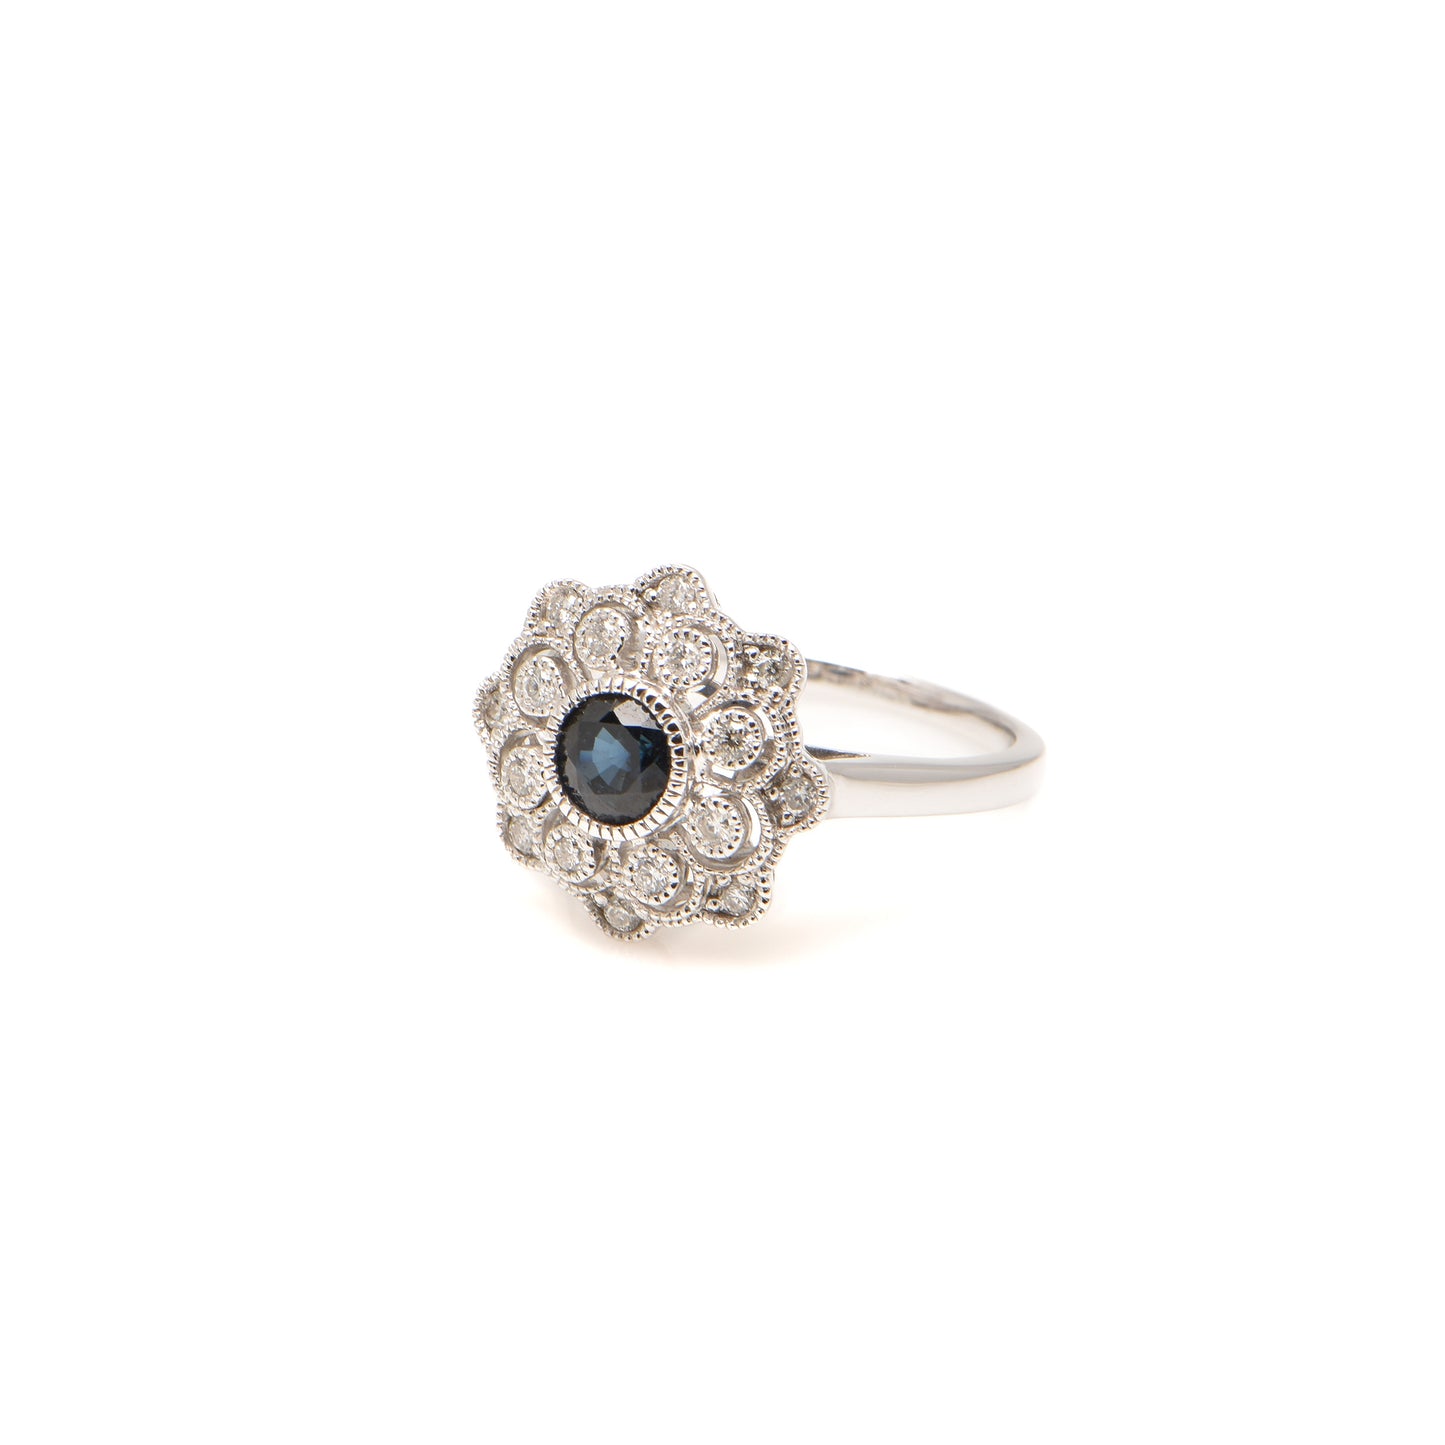 Sapphire and Diamond Deco Style Ring in 18ct White Gold